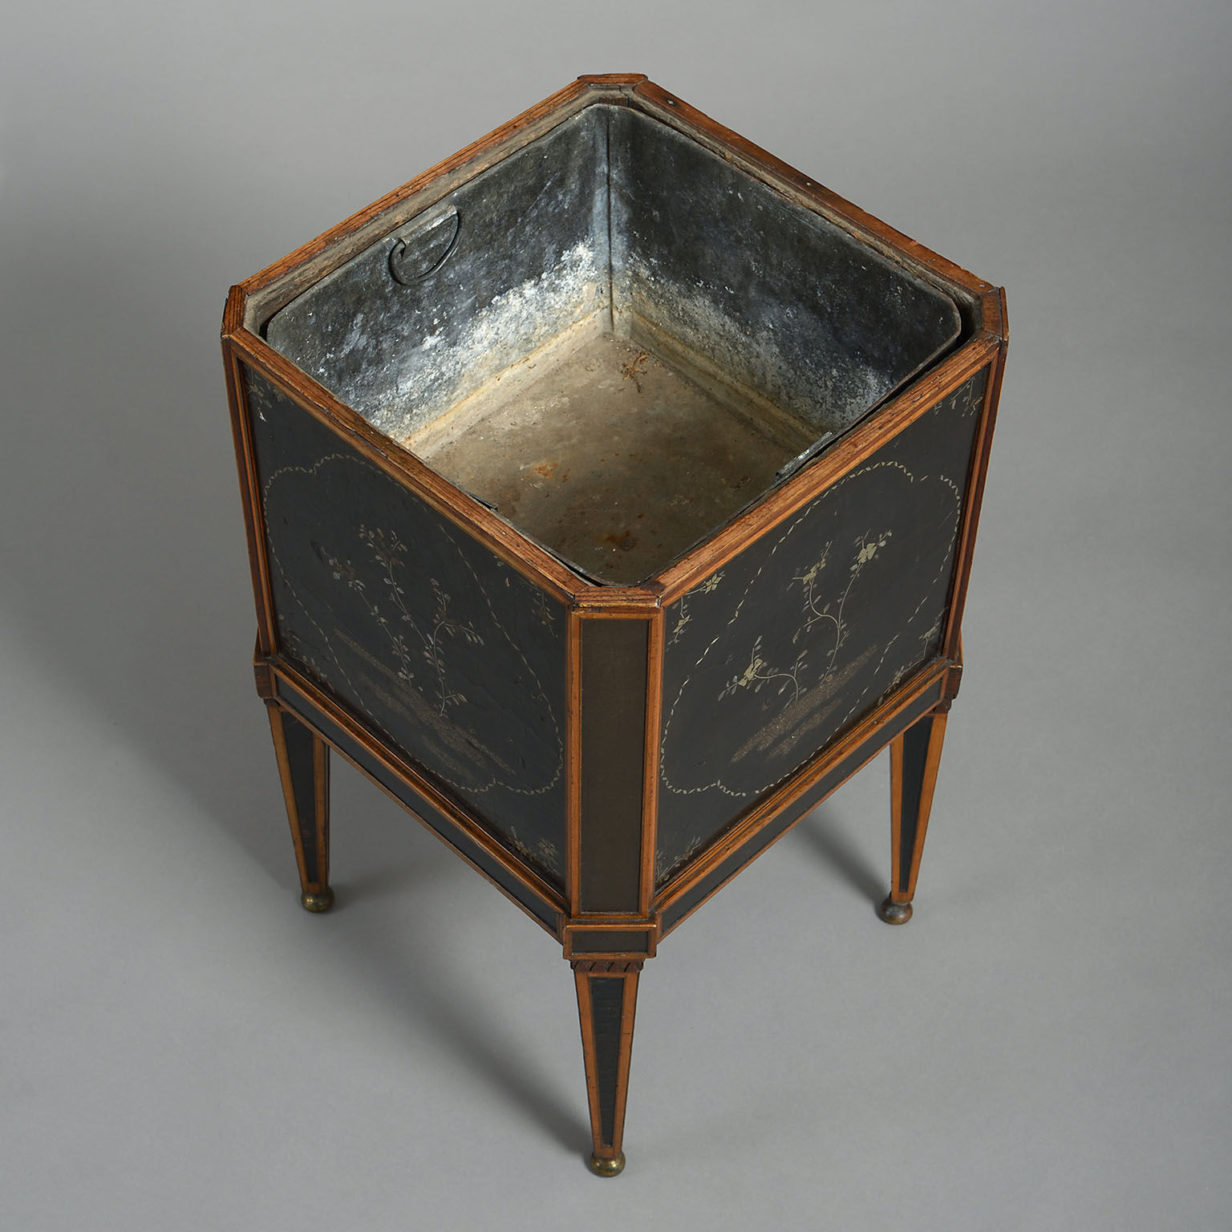 18th century dutch lacquer-mounted teestoof, jardiniere or wine cooler